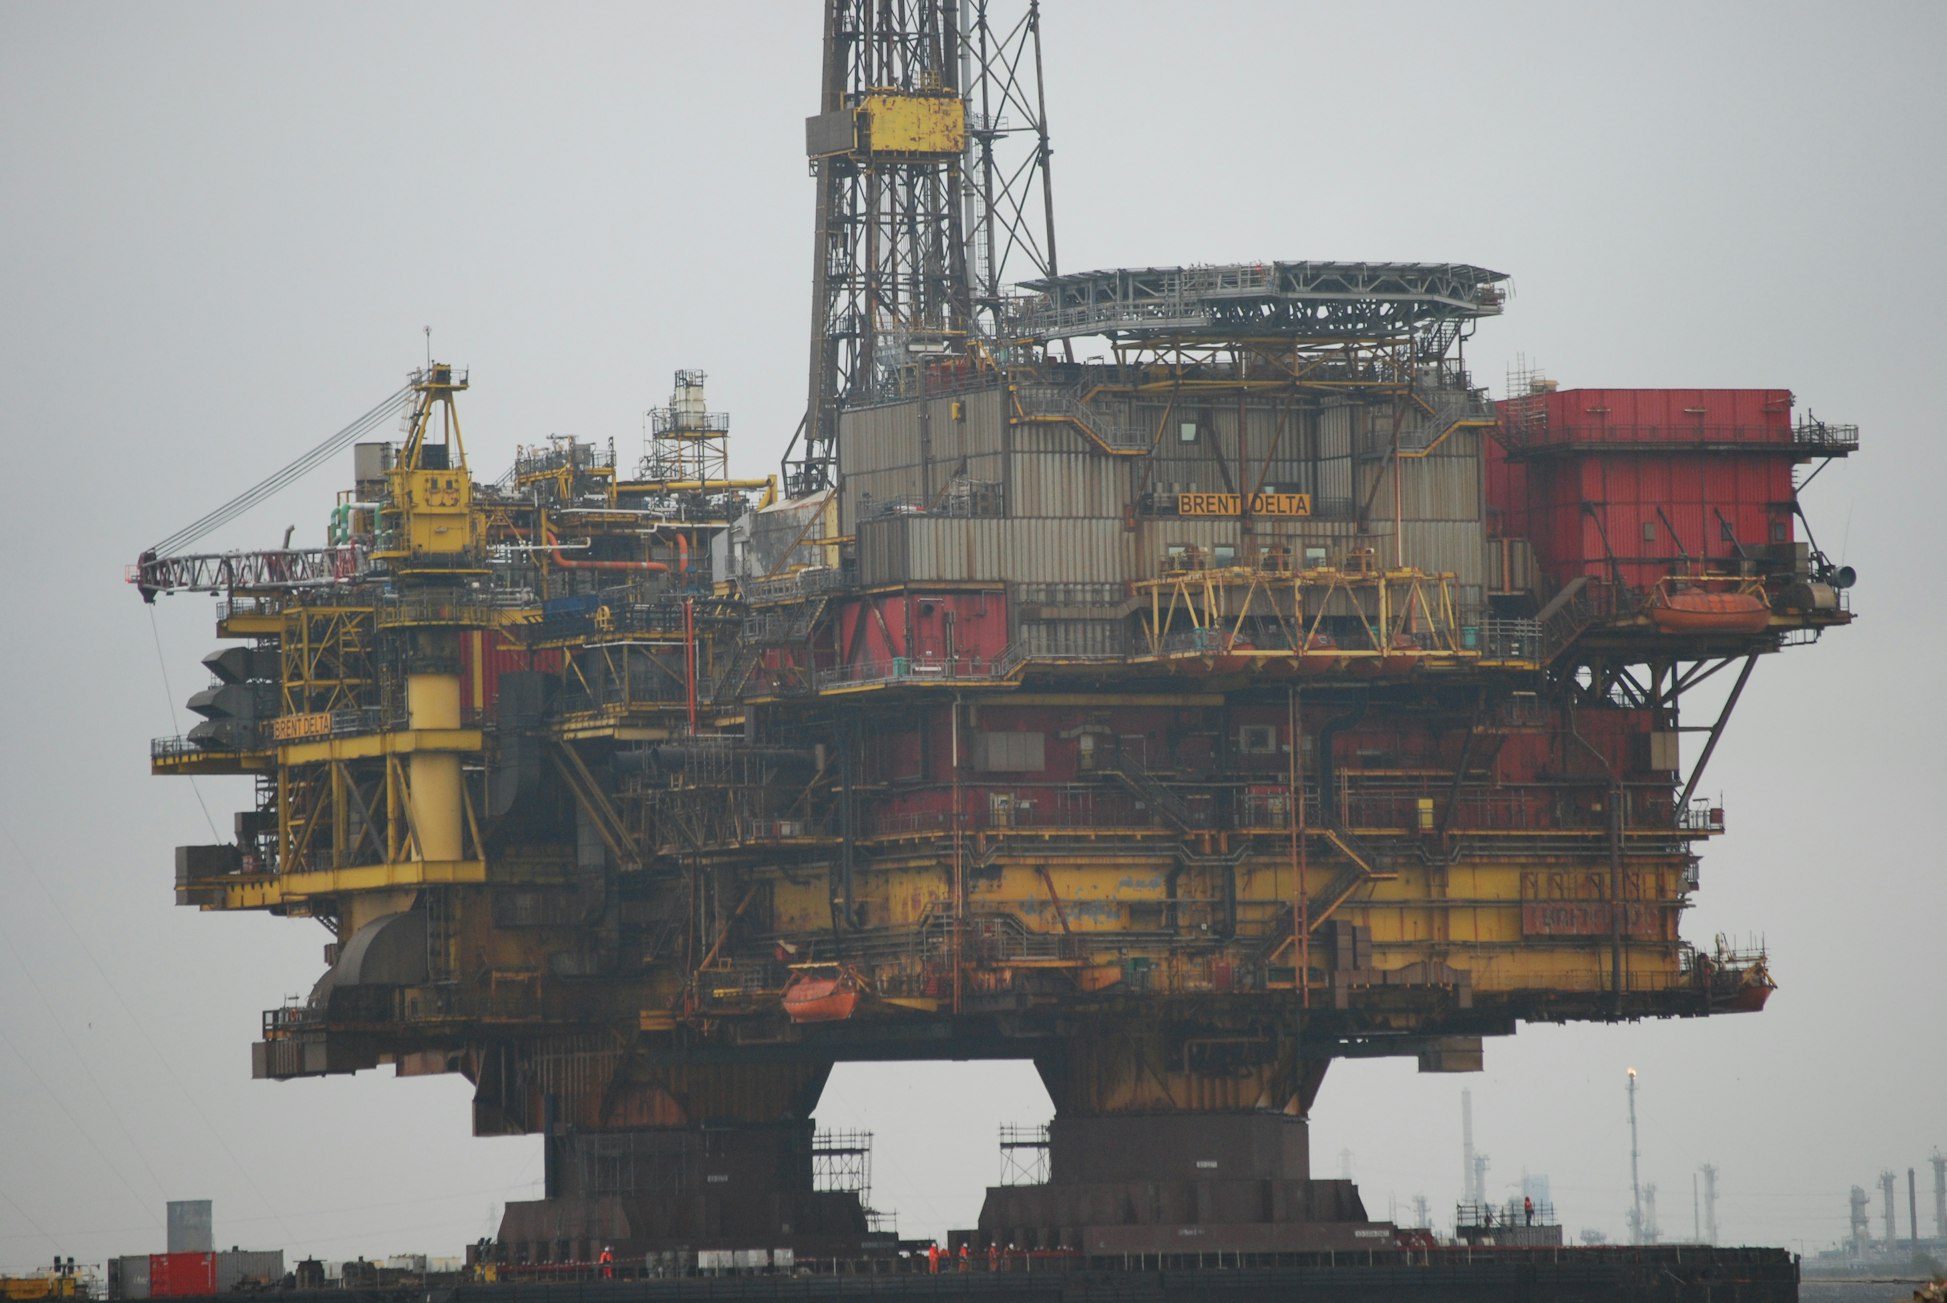 A photo of an oil rig